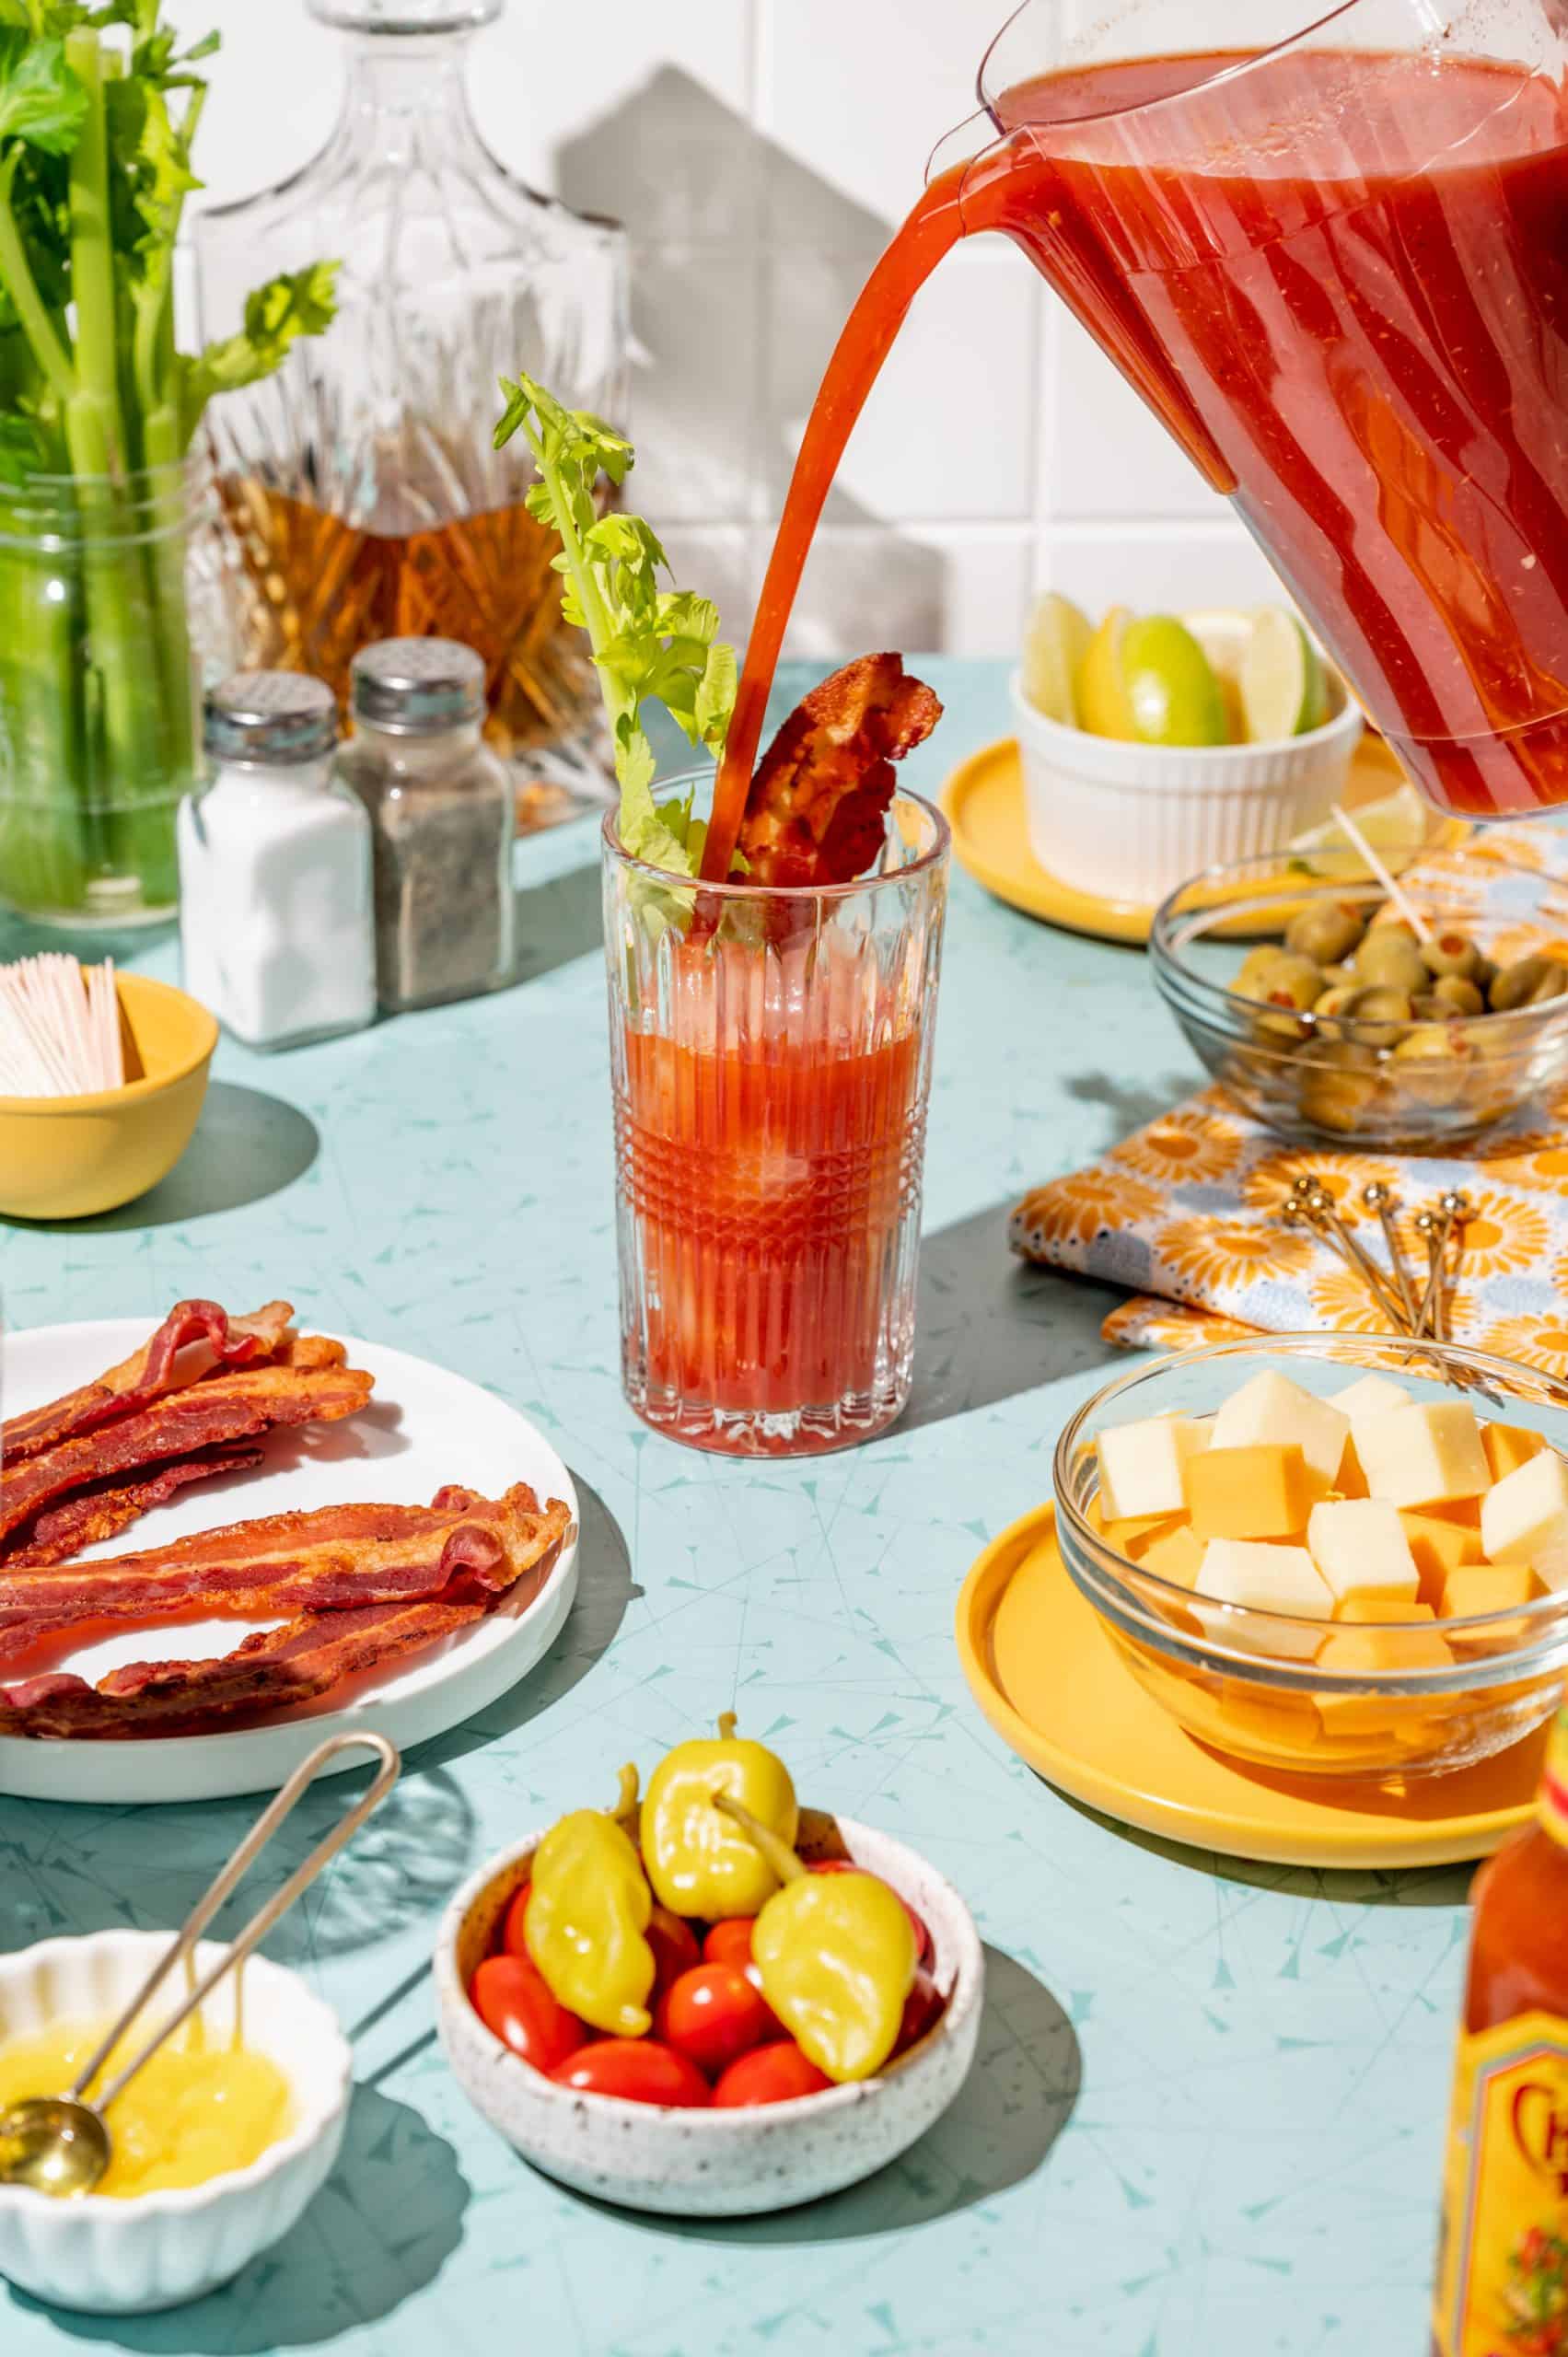 Pouring bloody mary mix into a glass with ice, a strip of bacon and a celery stalk